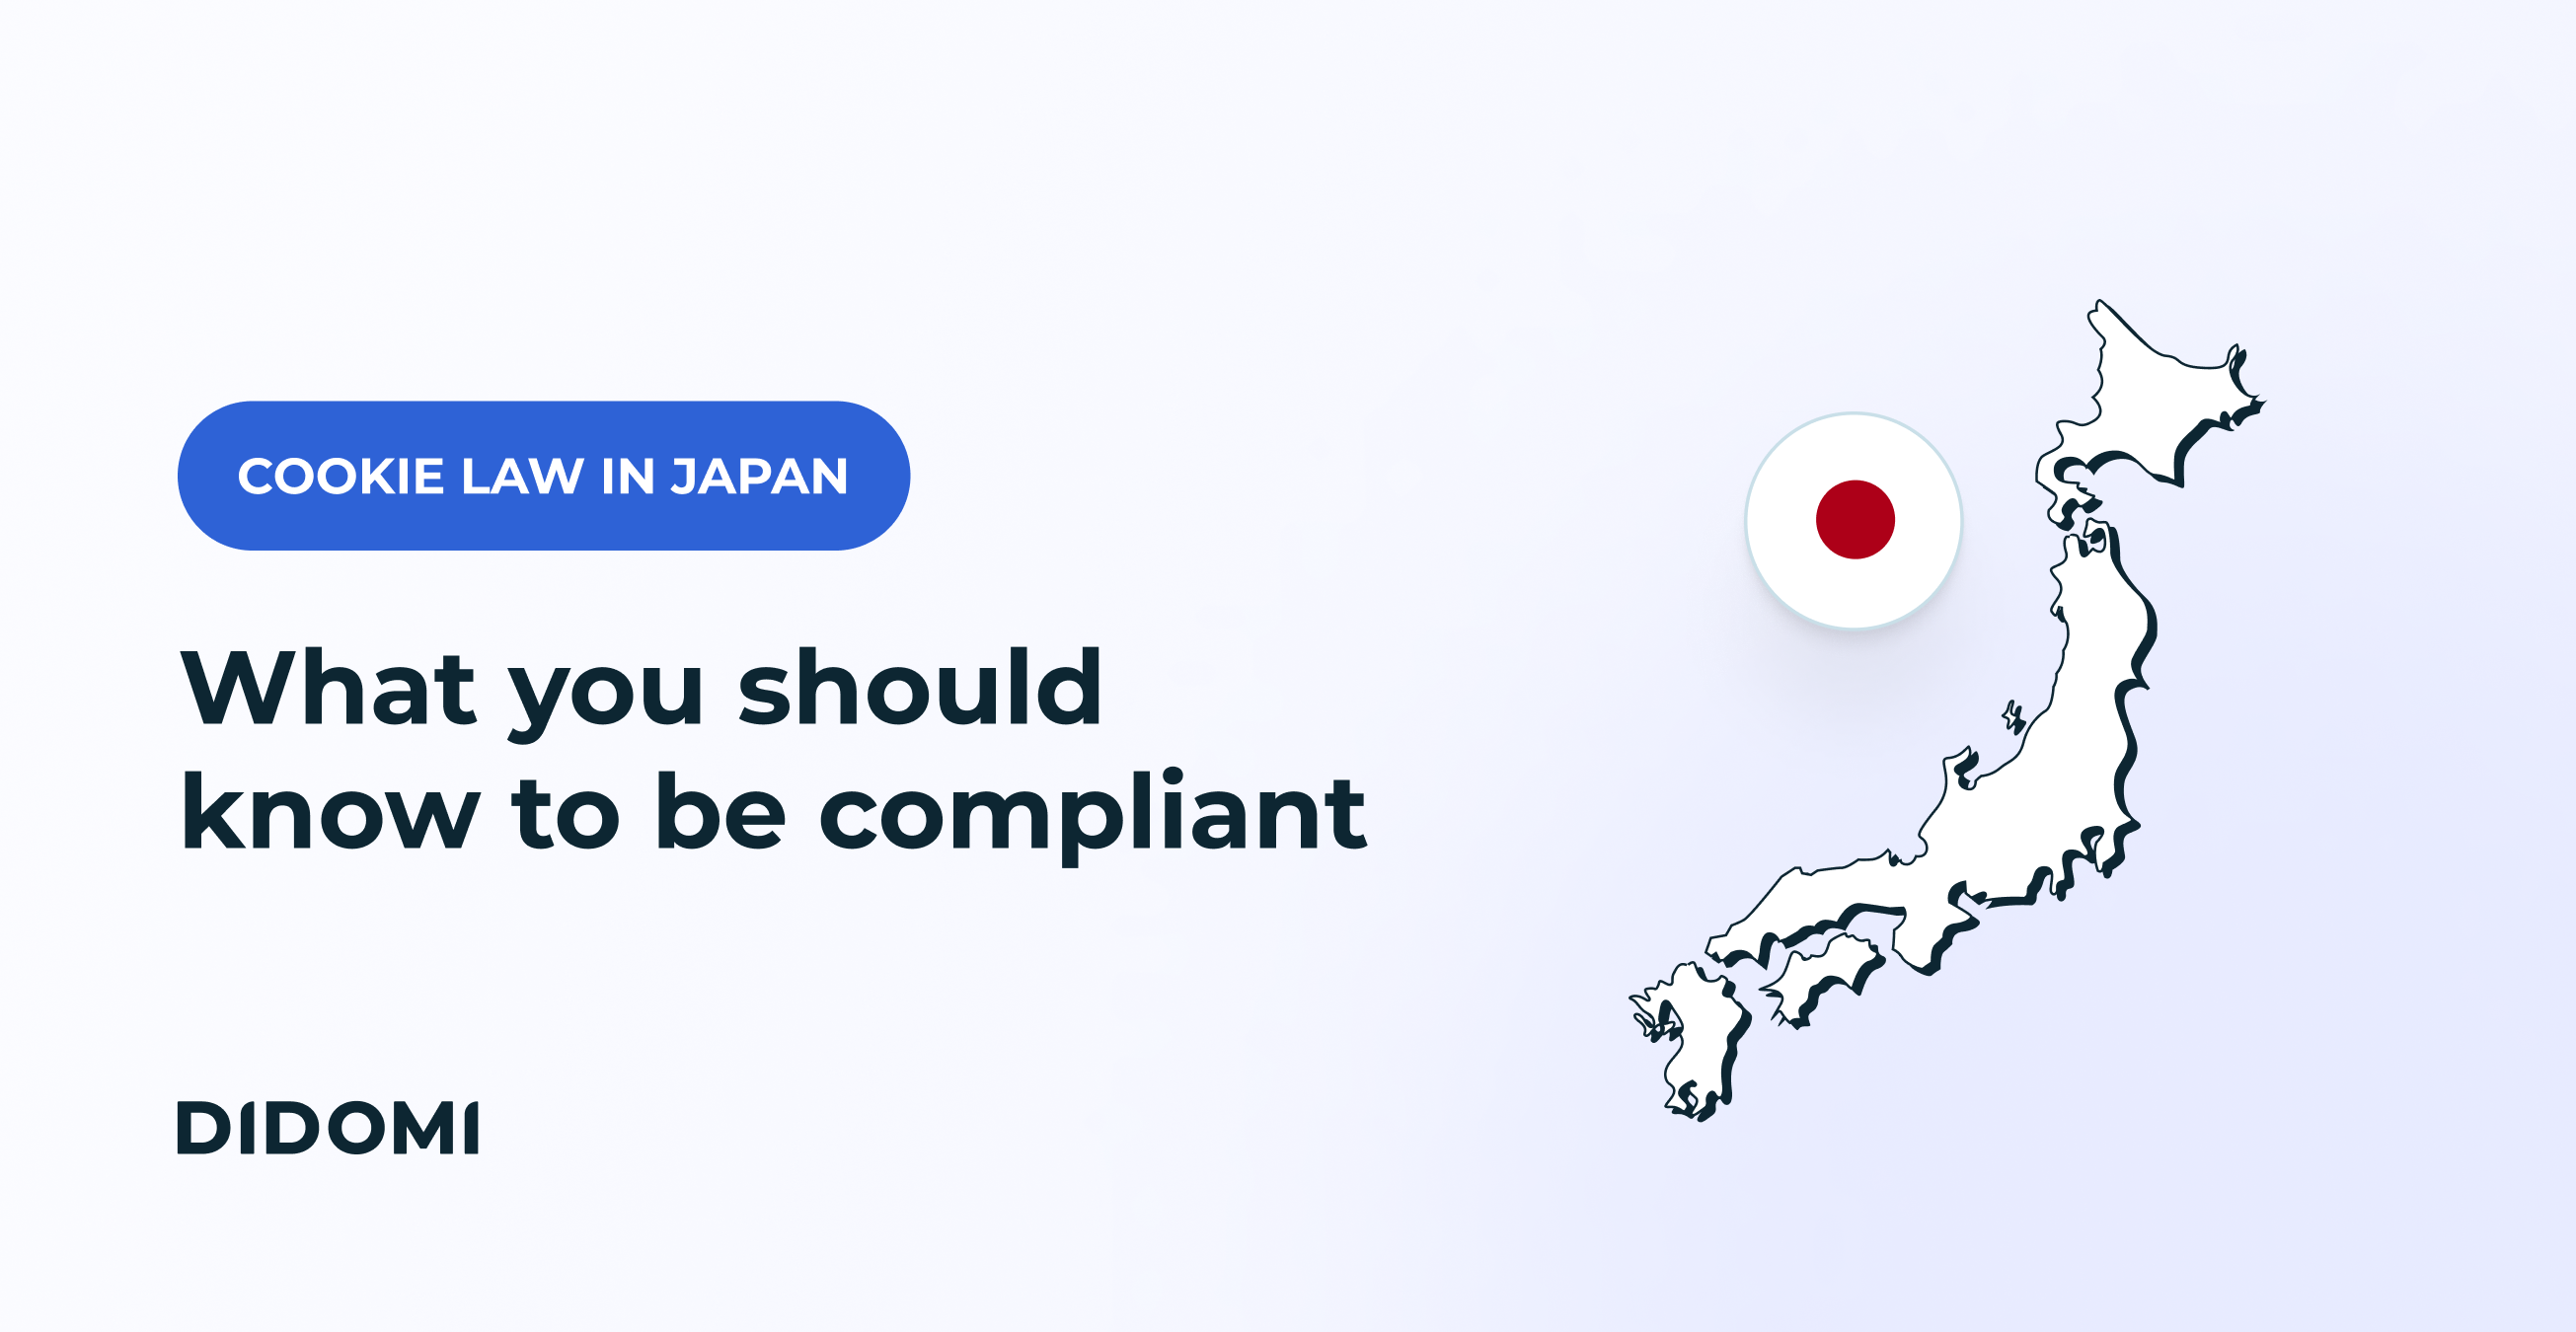 data privacy laws in japan - Everything you should know to be compliant with the APPI